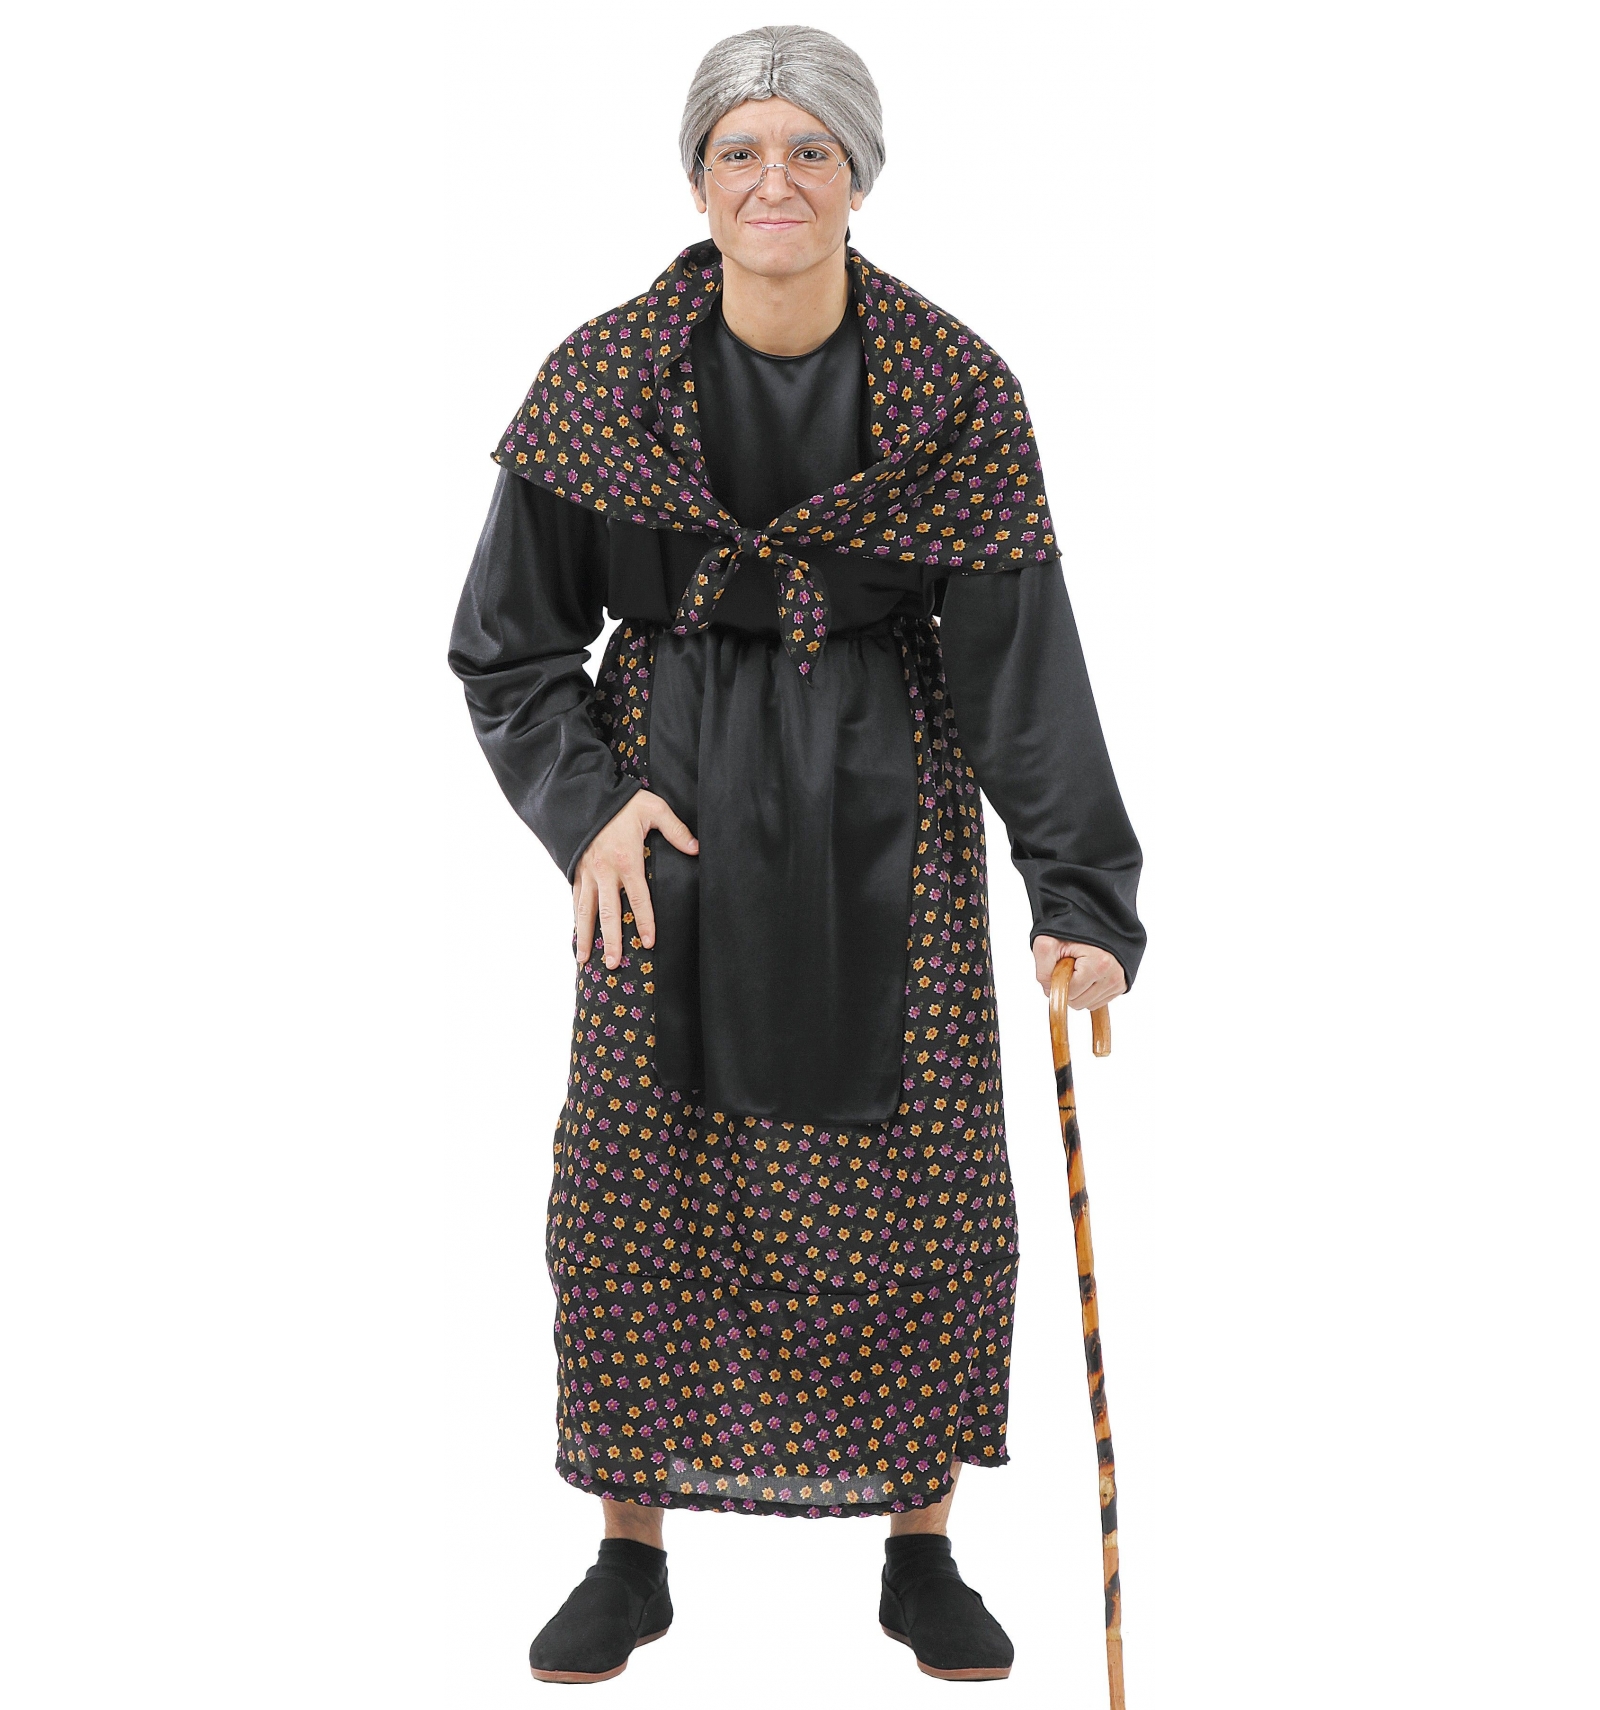 Scary Old Lady Costume